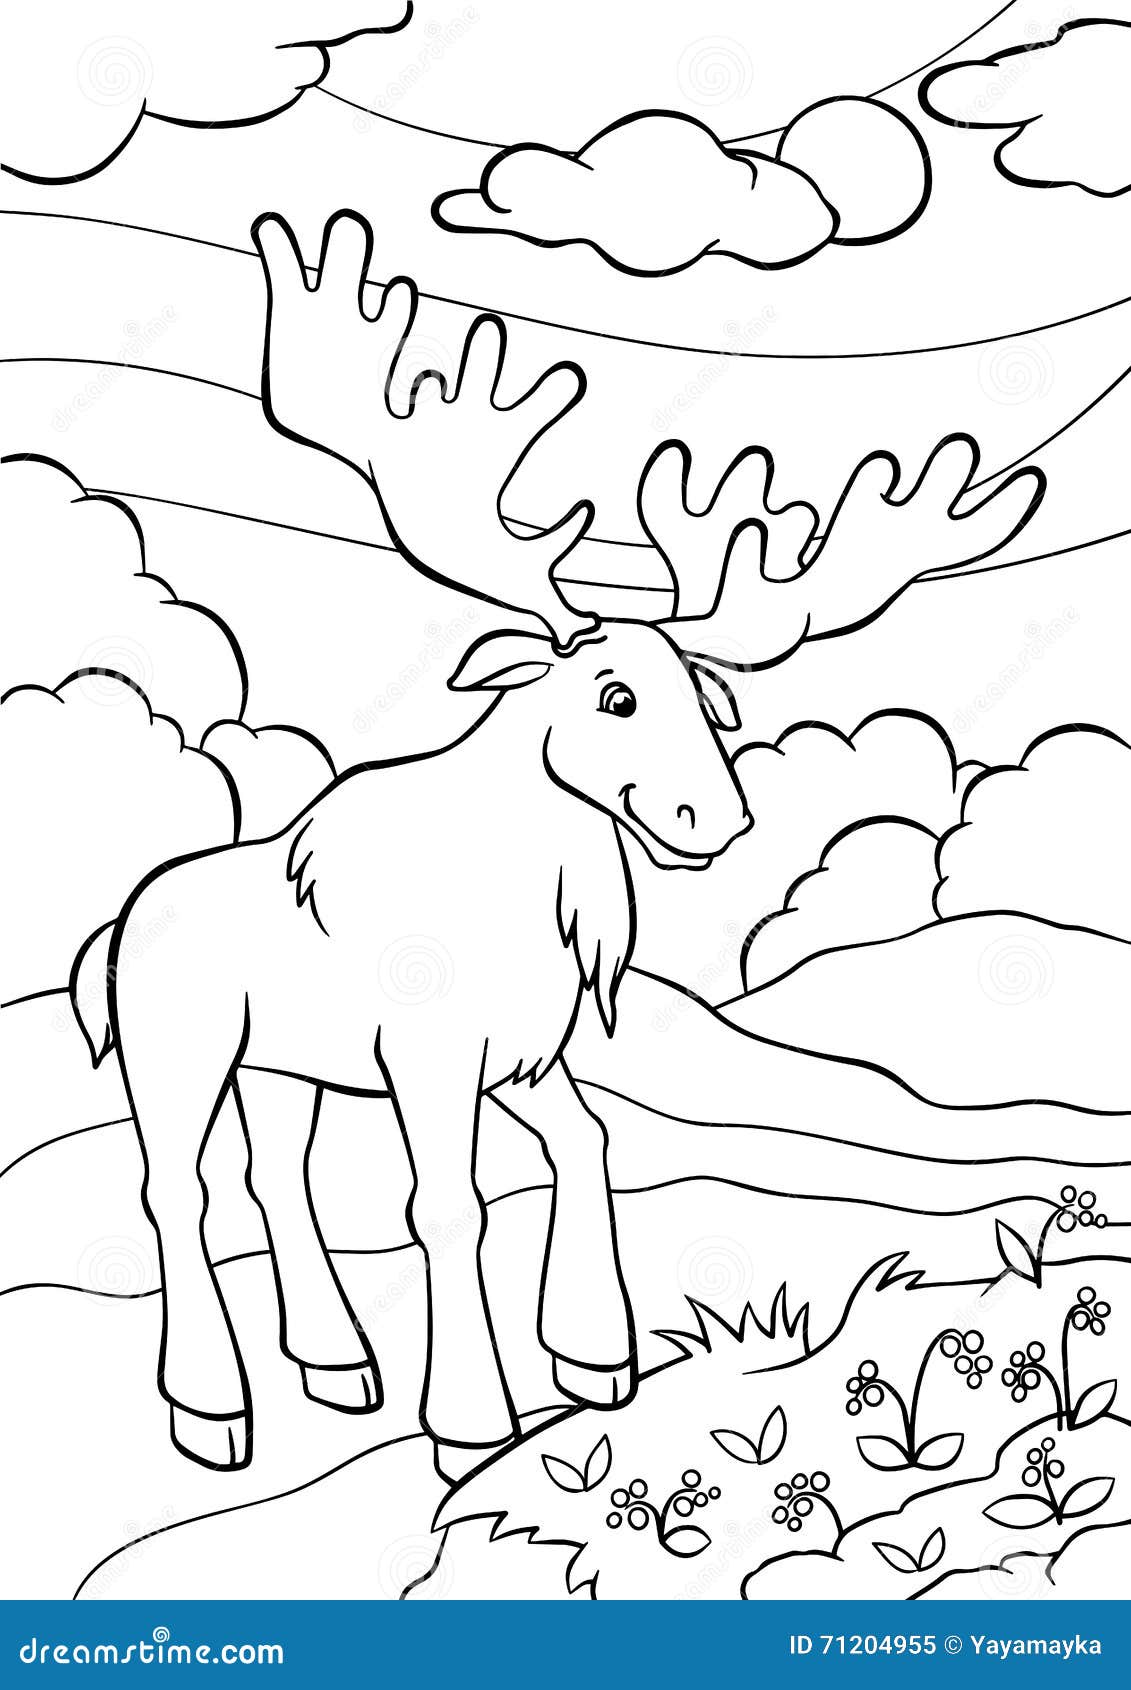 Coloring pages animals cute elk stock vector